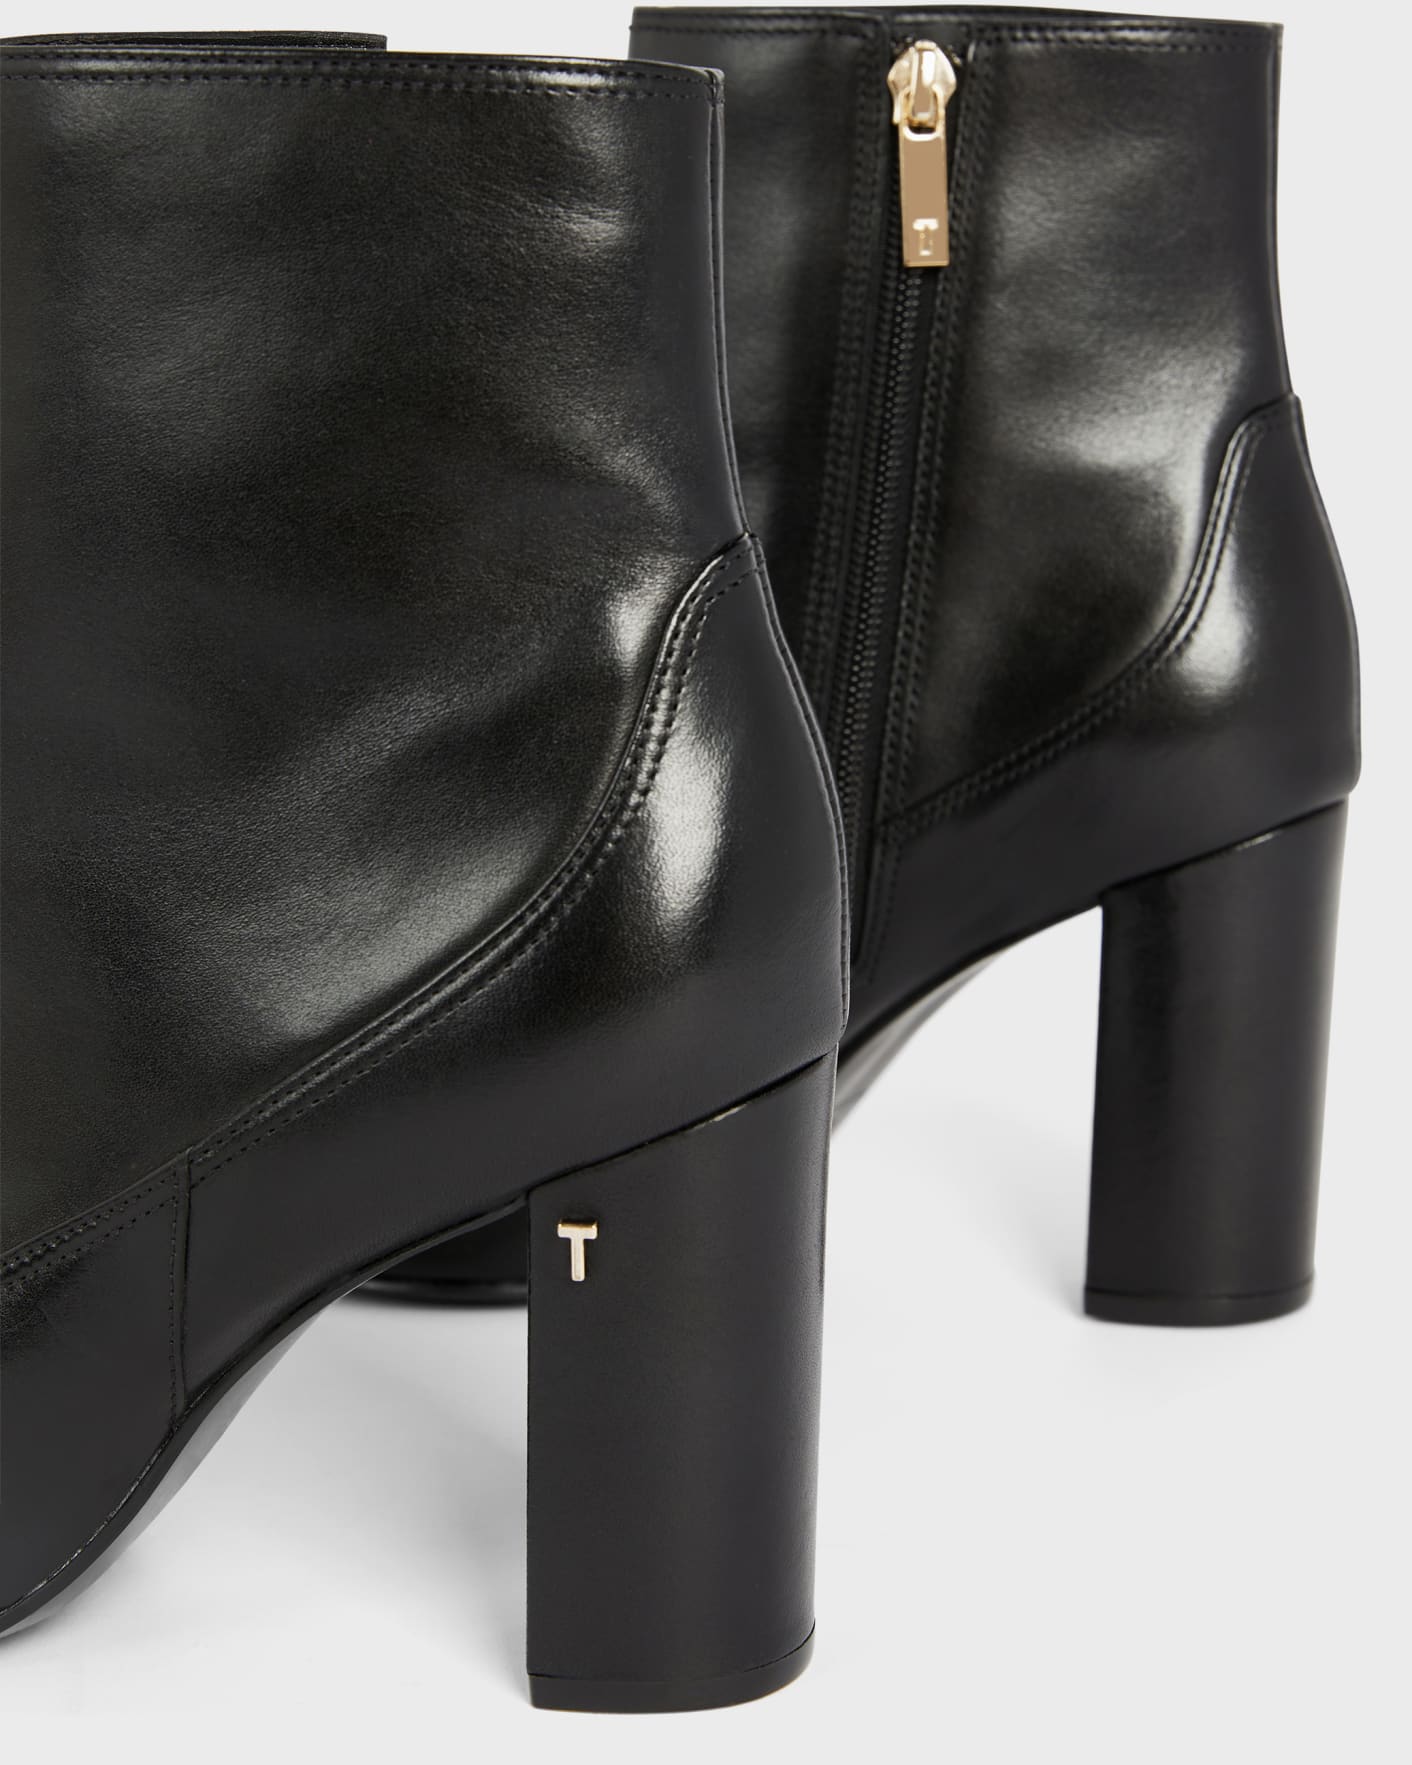 Black Leather Block Heel Ankle Boot Ted Baker